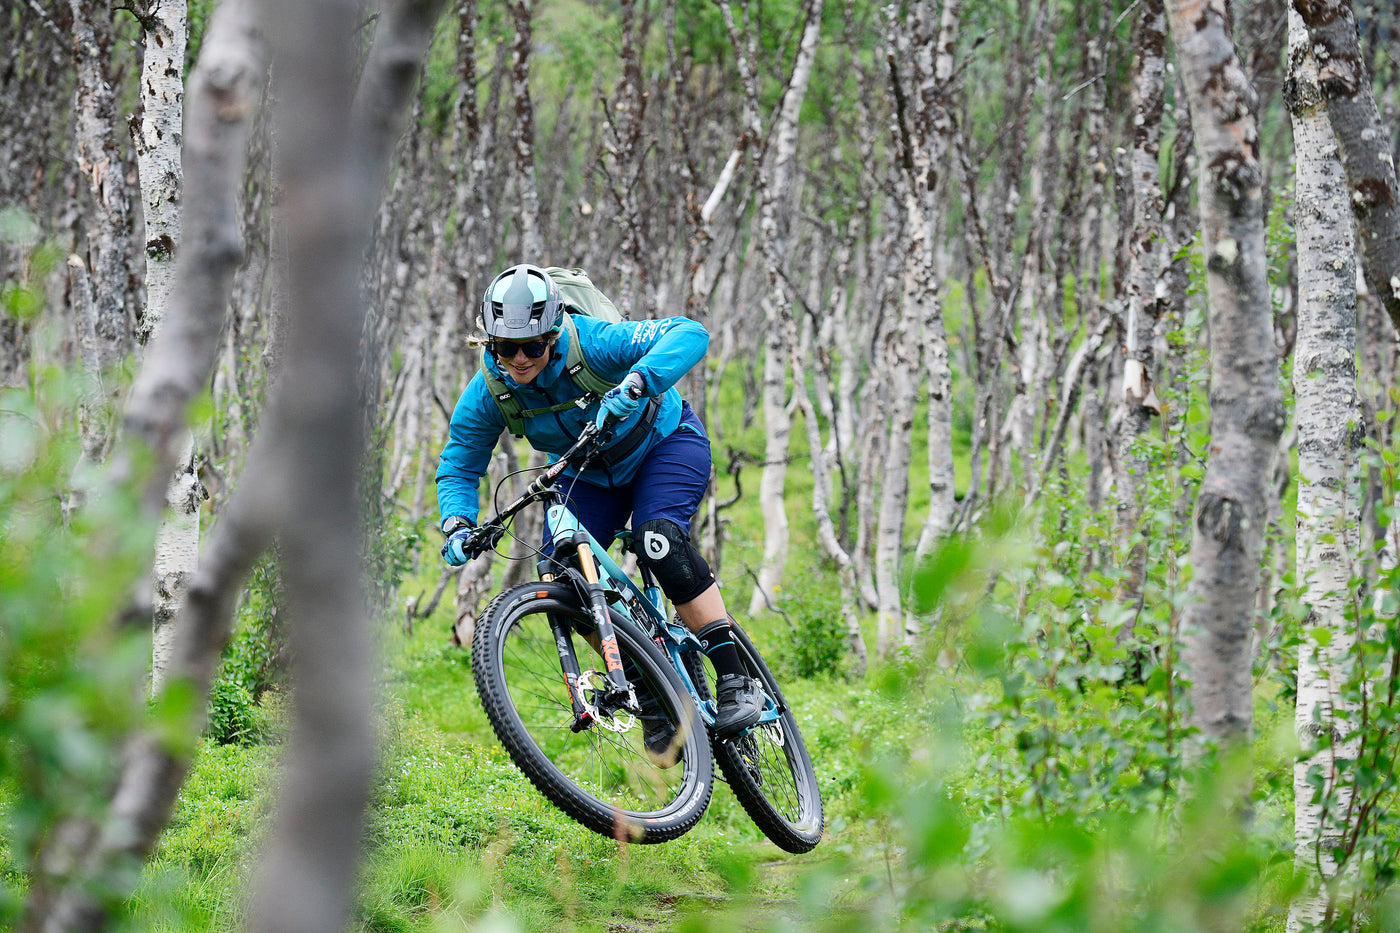 EVOC backpack worn by mountain biker in lush green forest